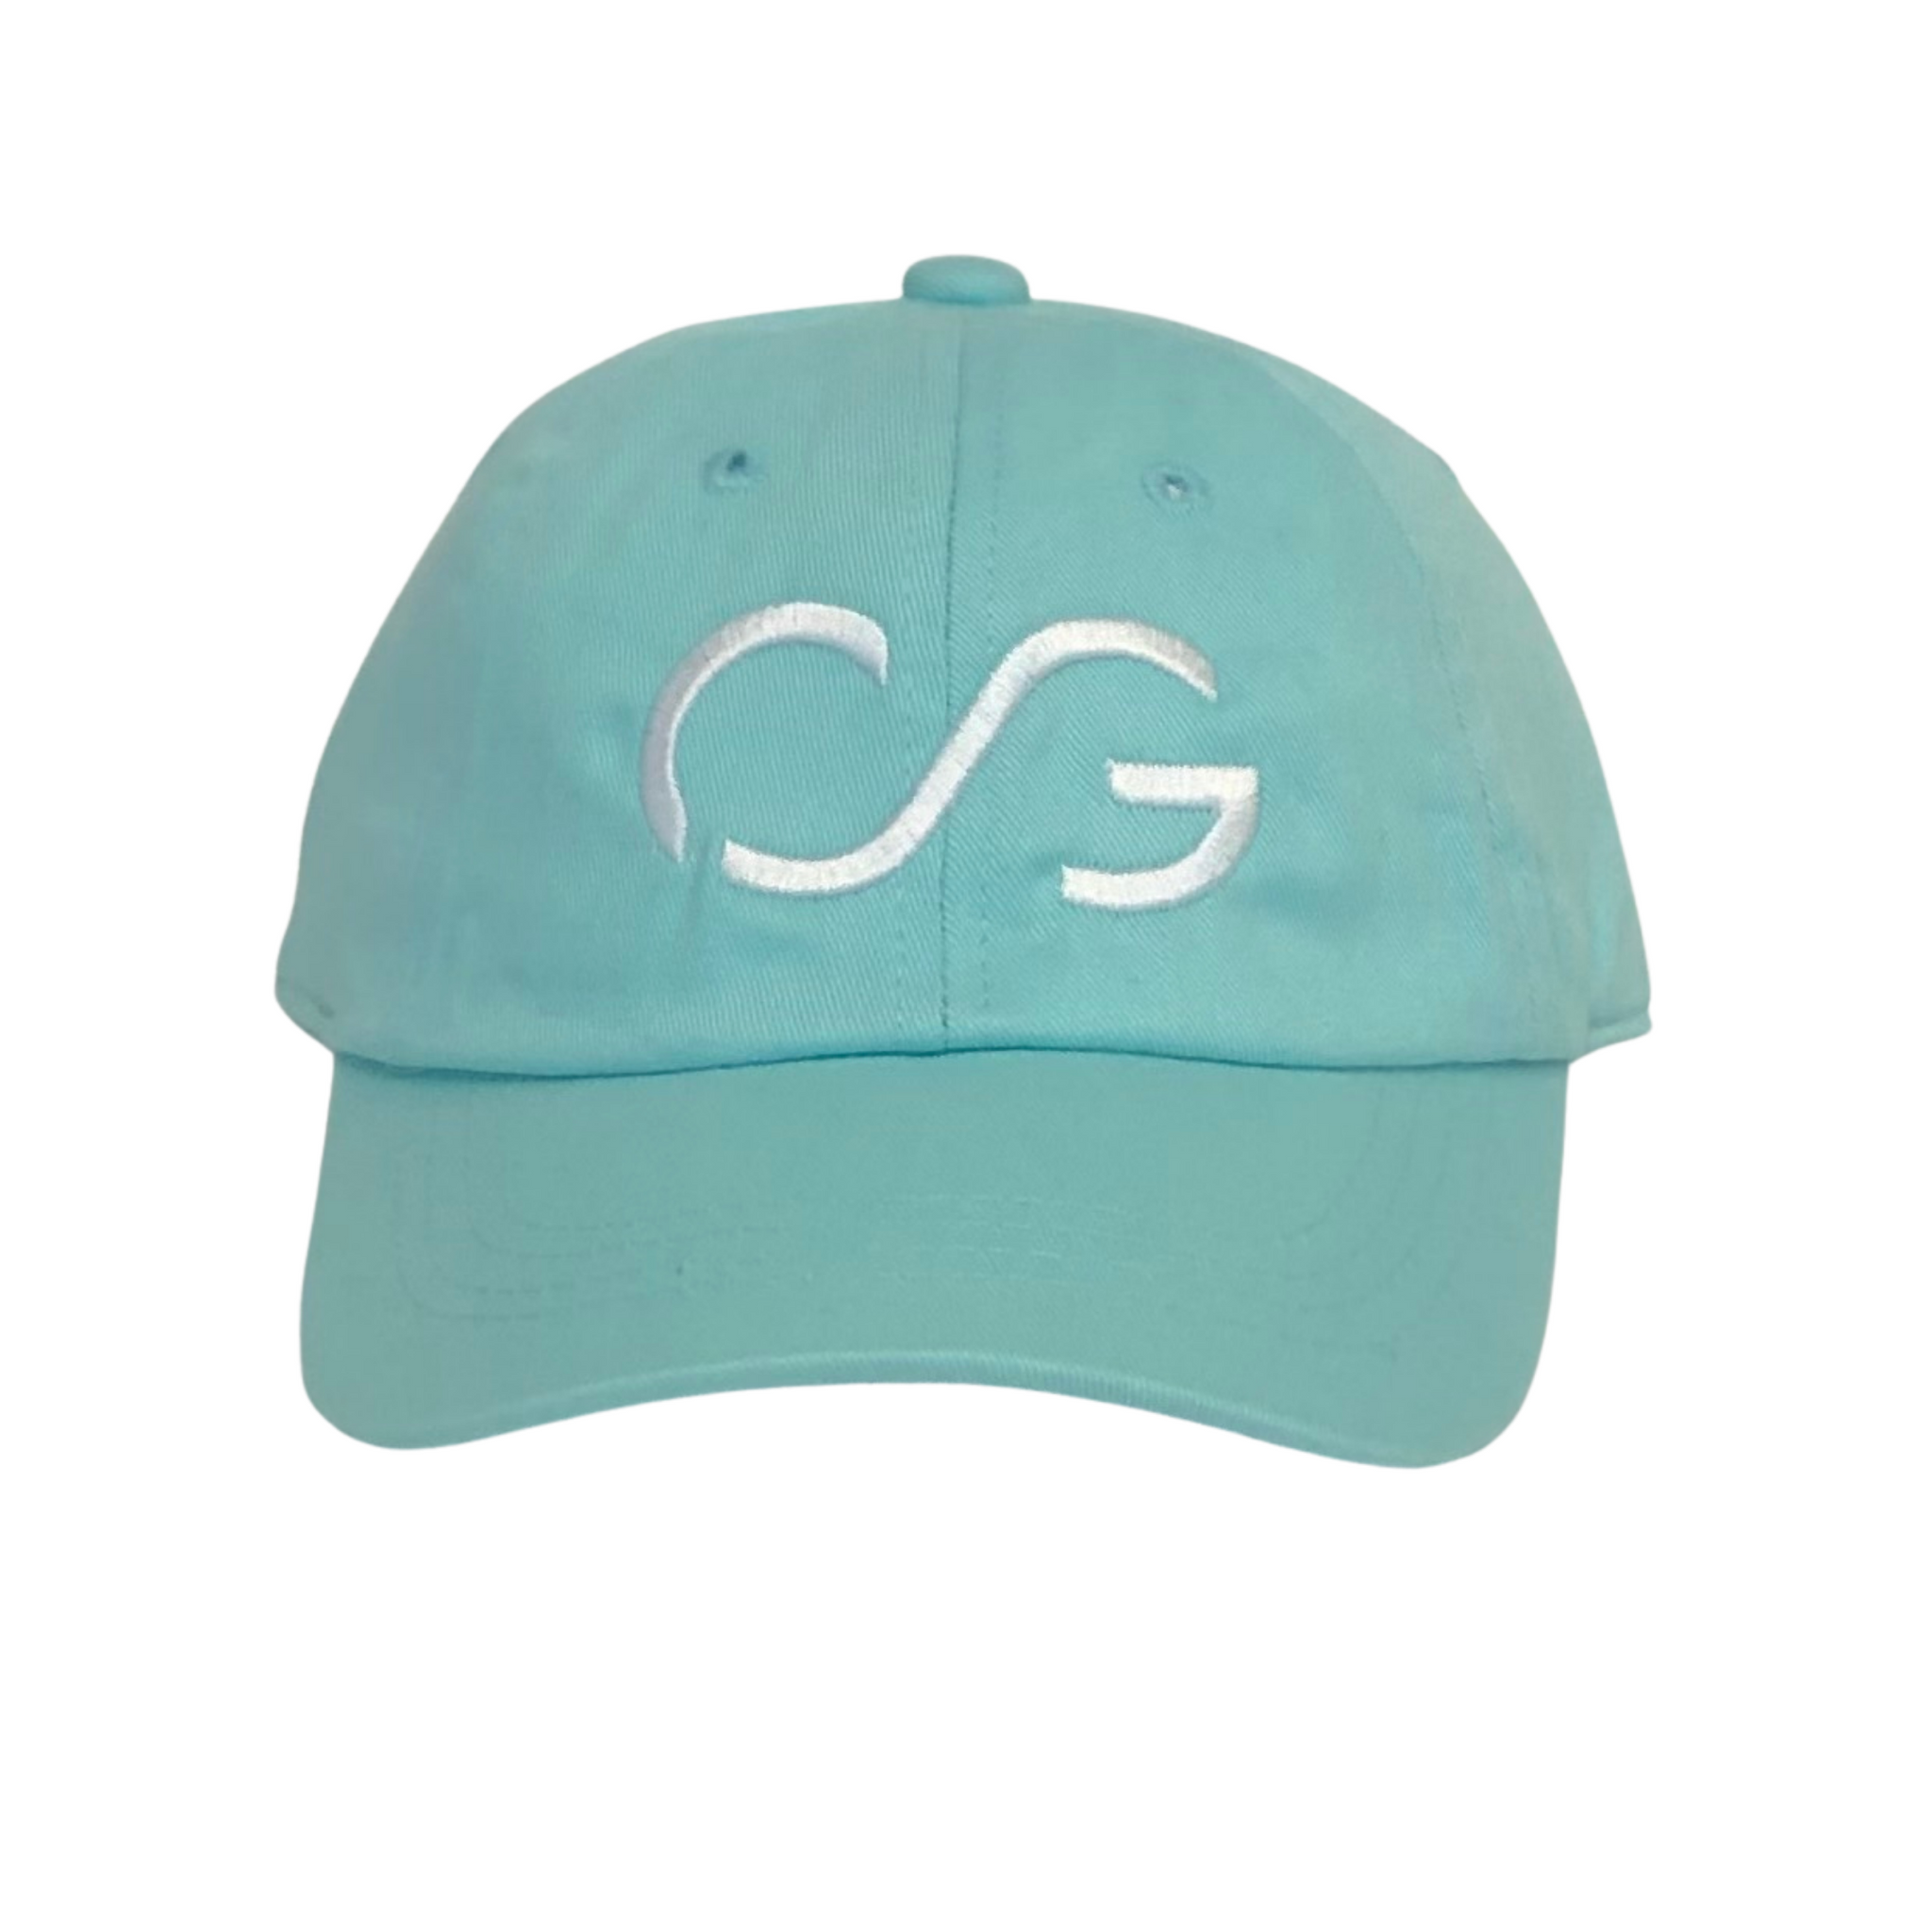 Kids-Diamond Blue Hat with White Embroidery